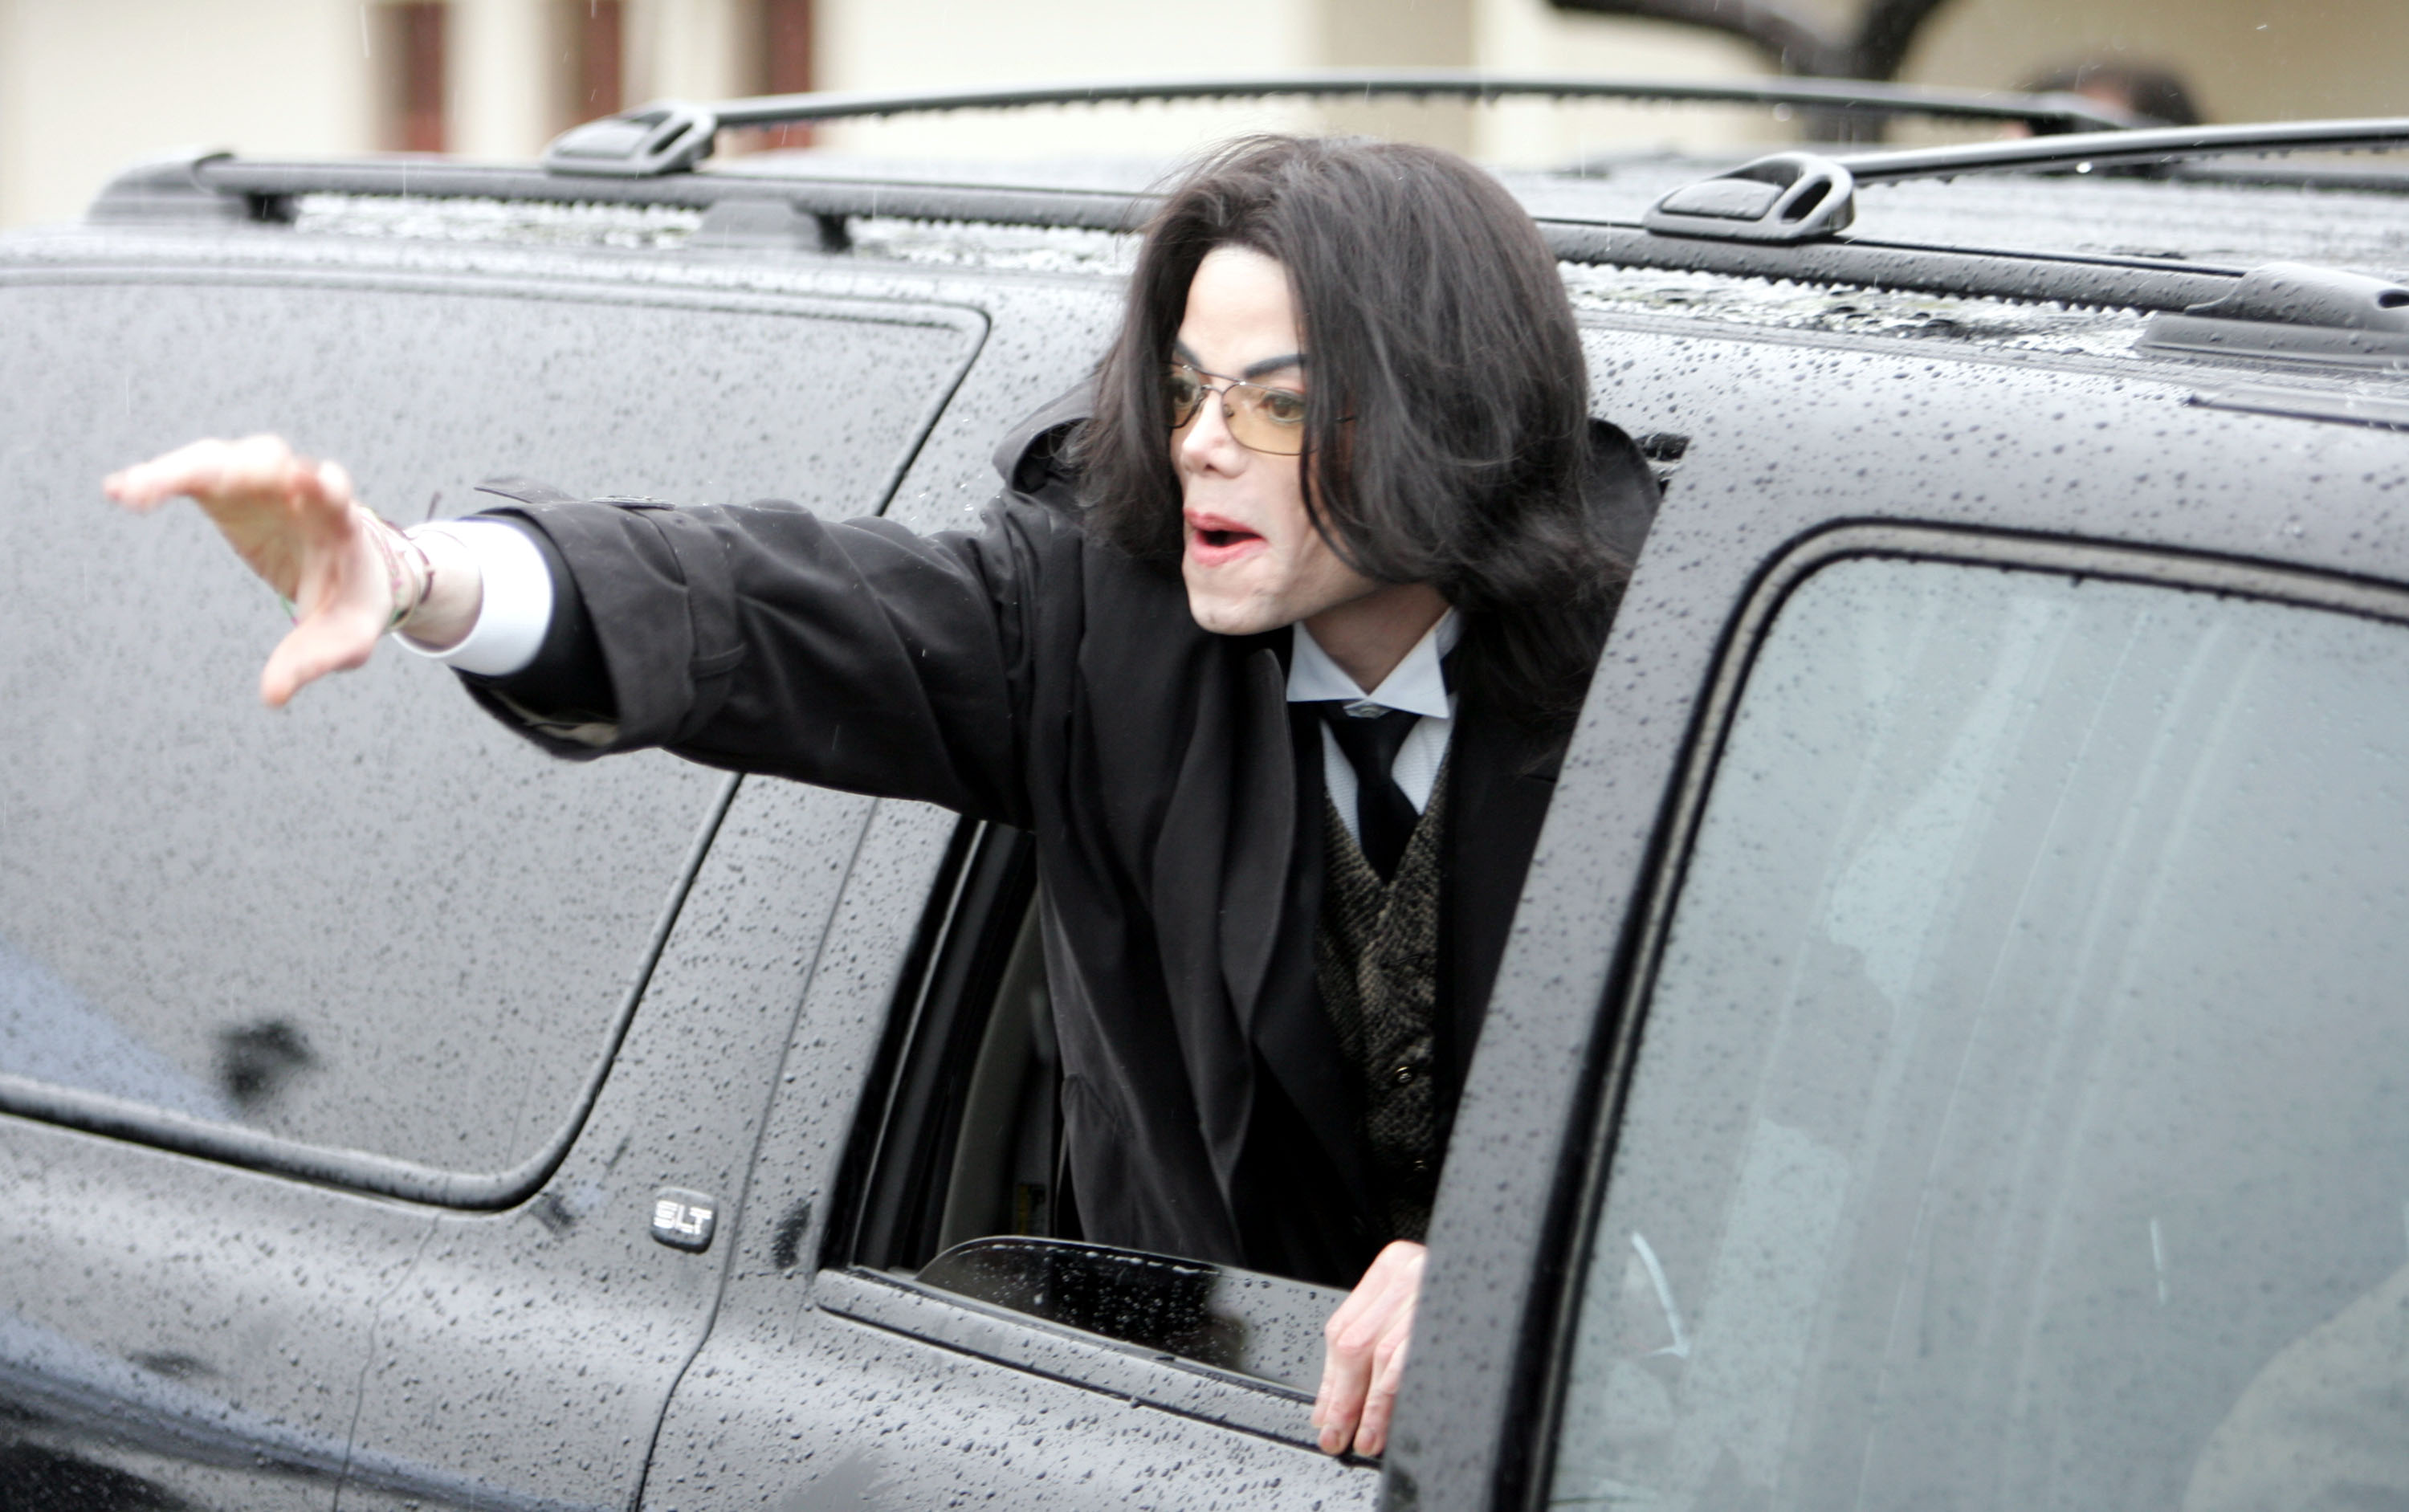 Michael Jackson at the Santa Barbara County Courthouse in 2005 | Source: Getty Images